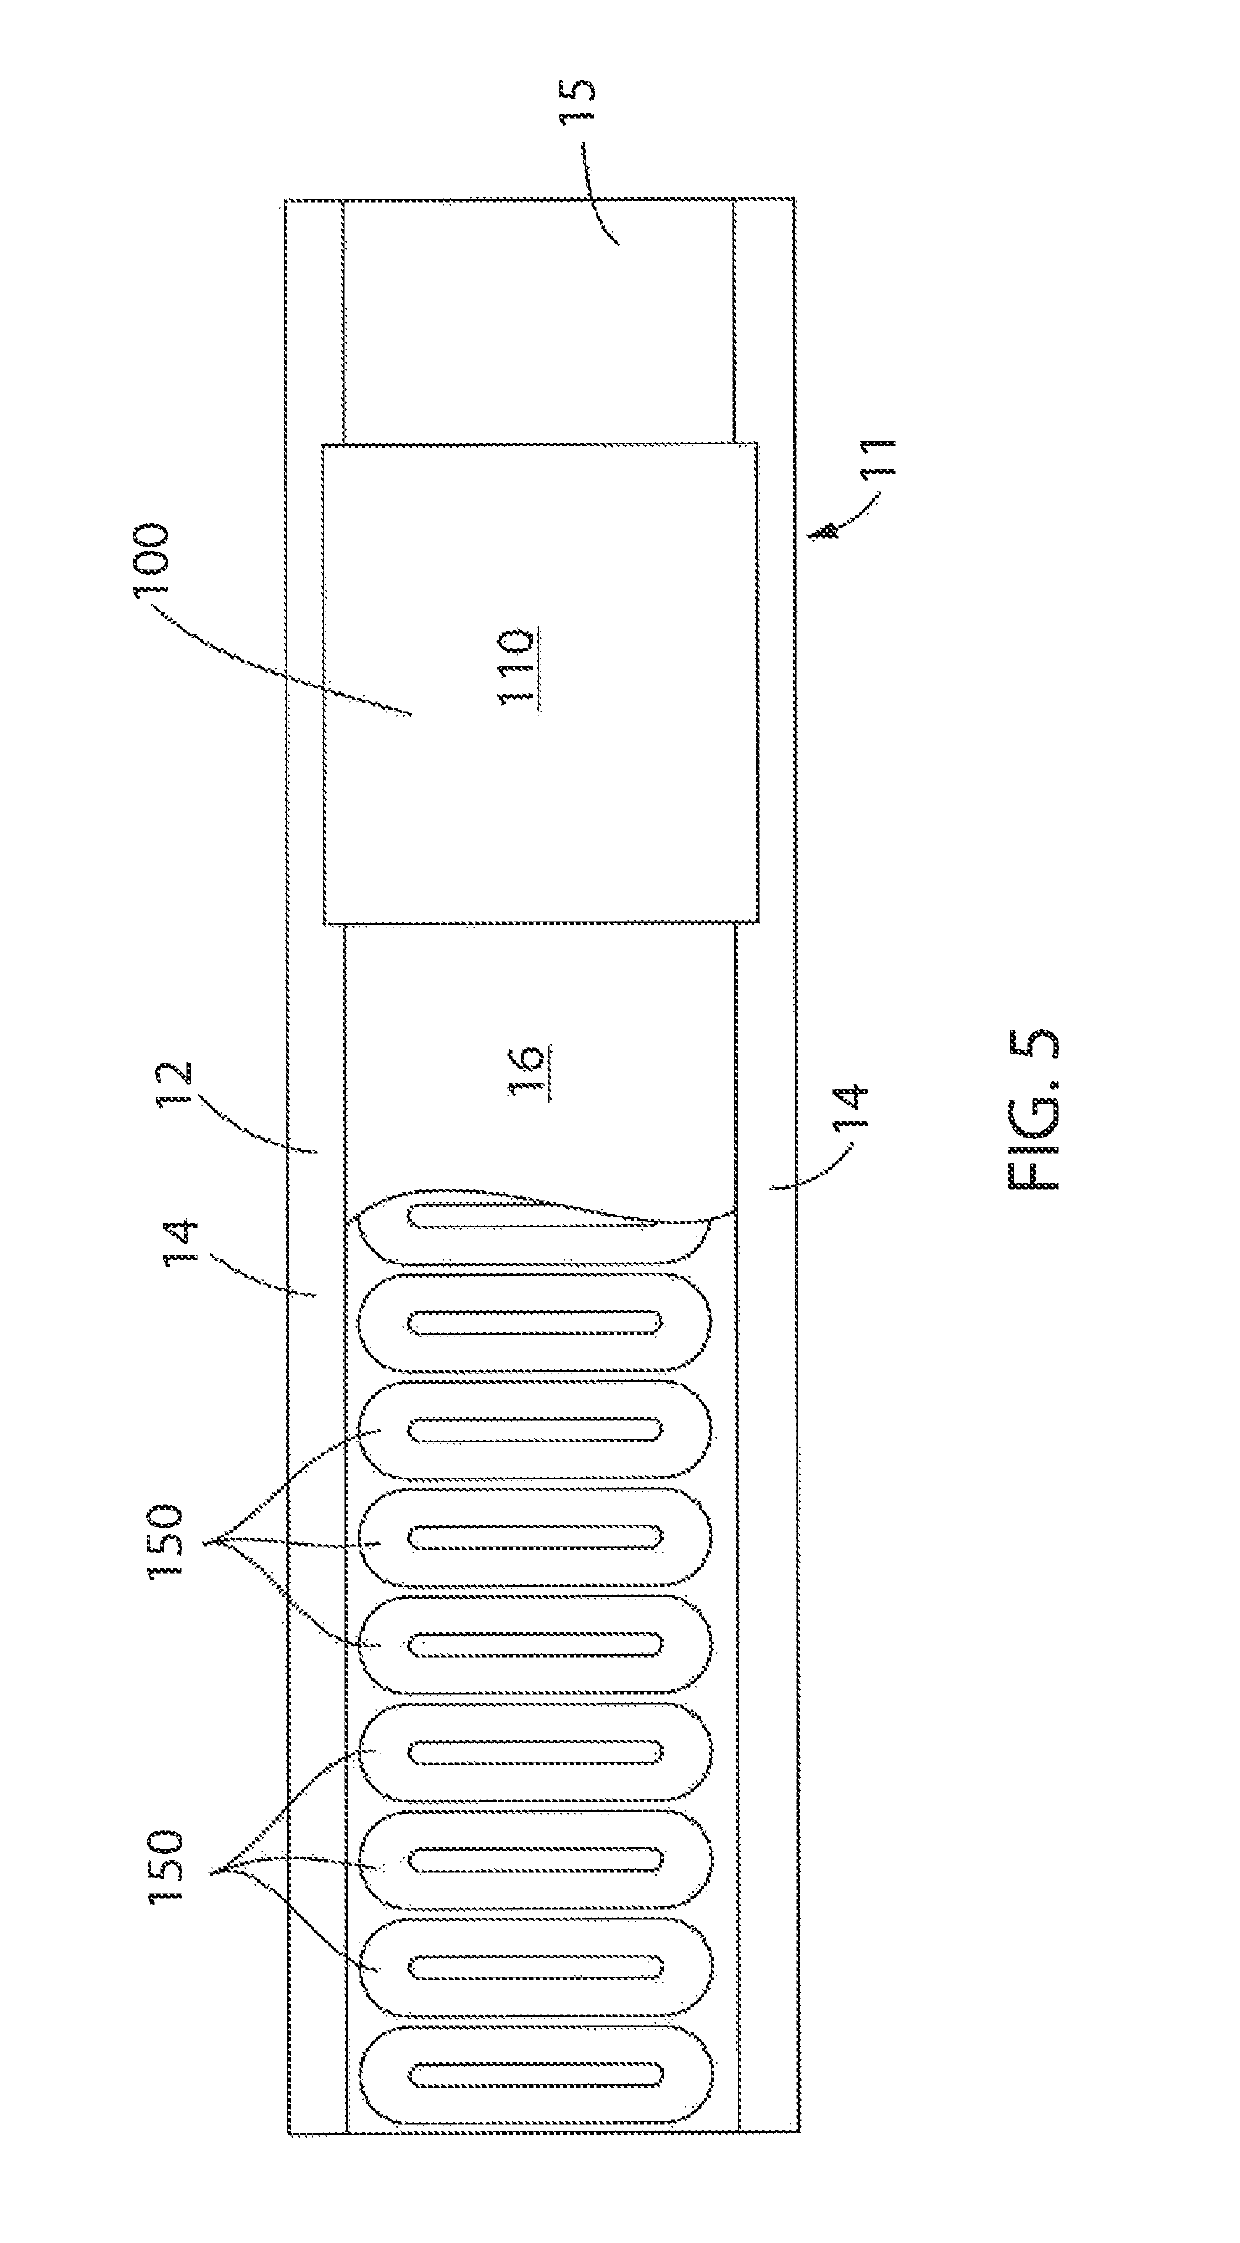 Linear drive system having central, distributed and group control